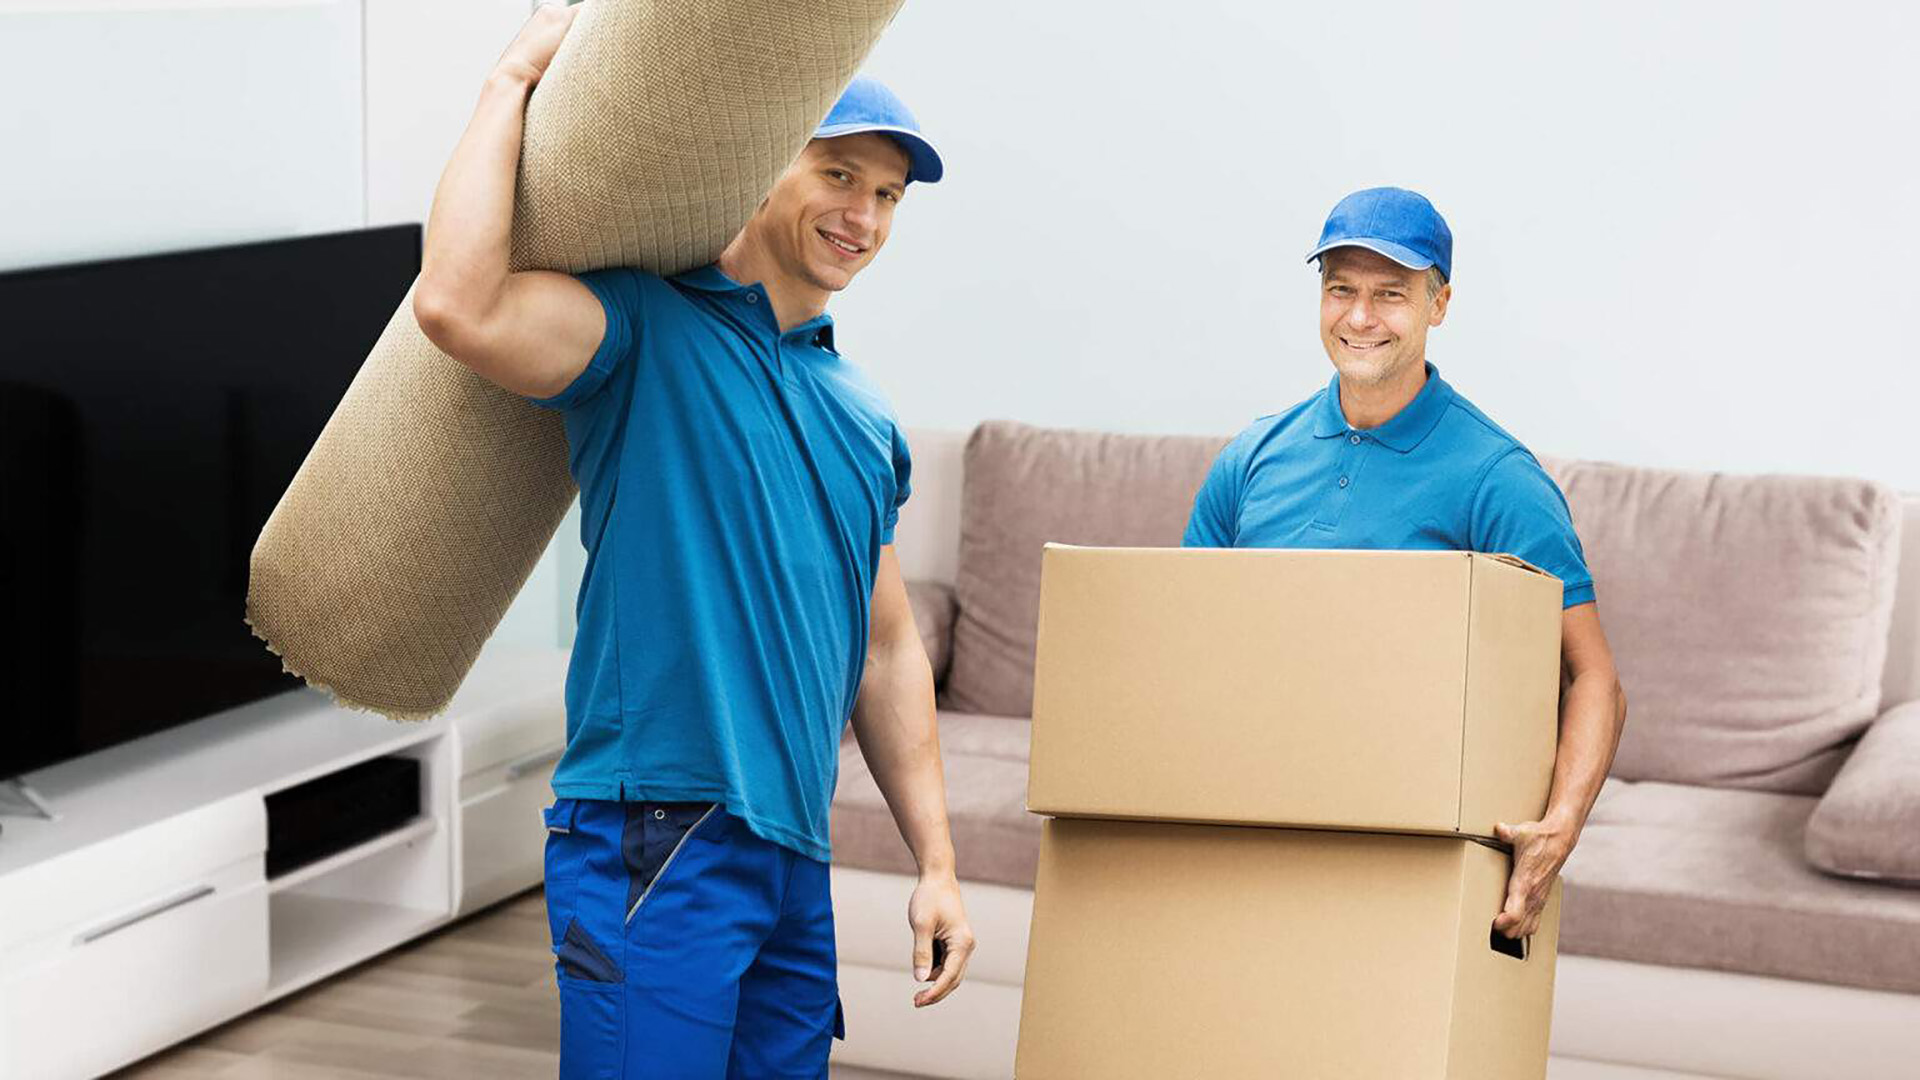 Packers-And-Movers-1536x864